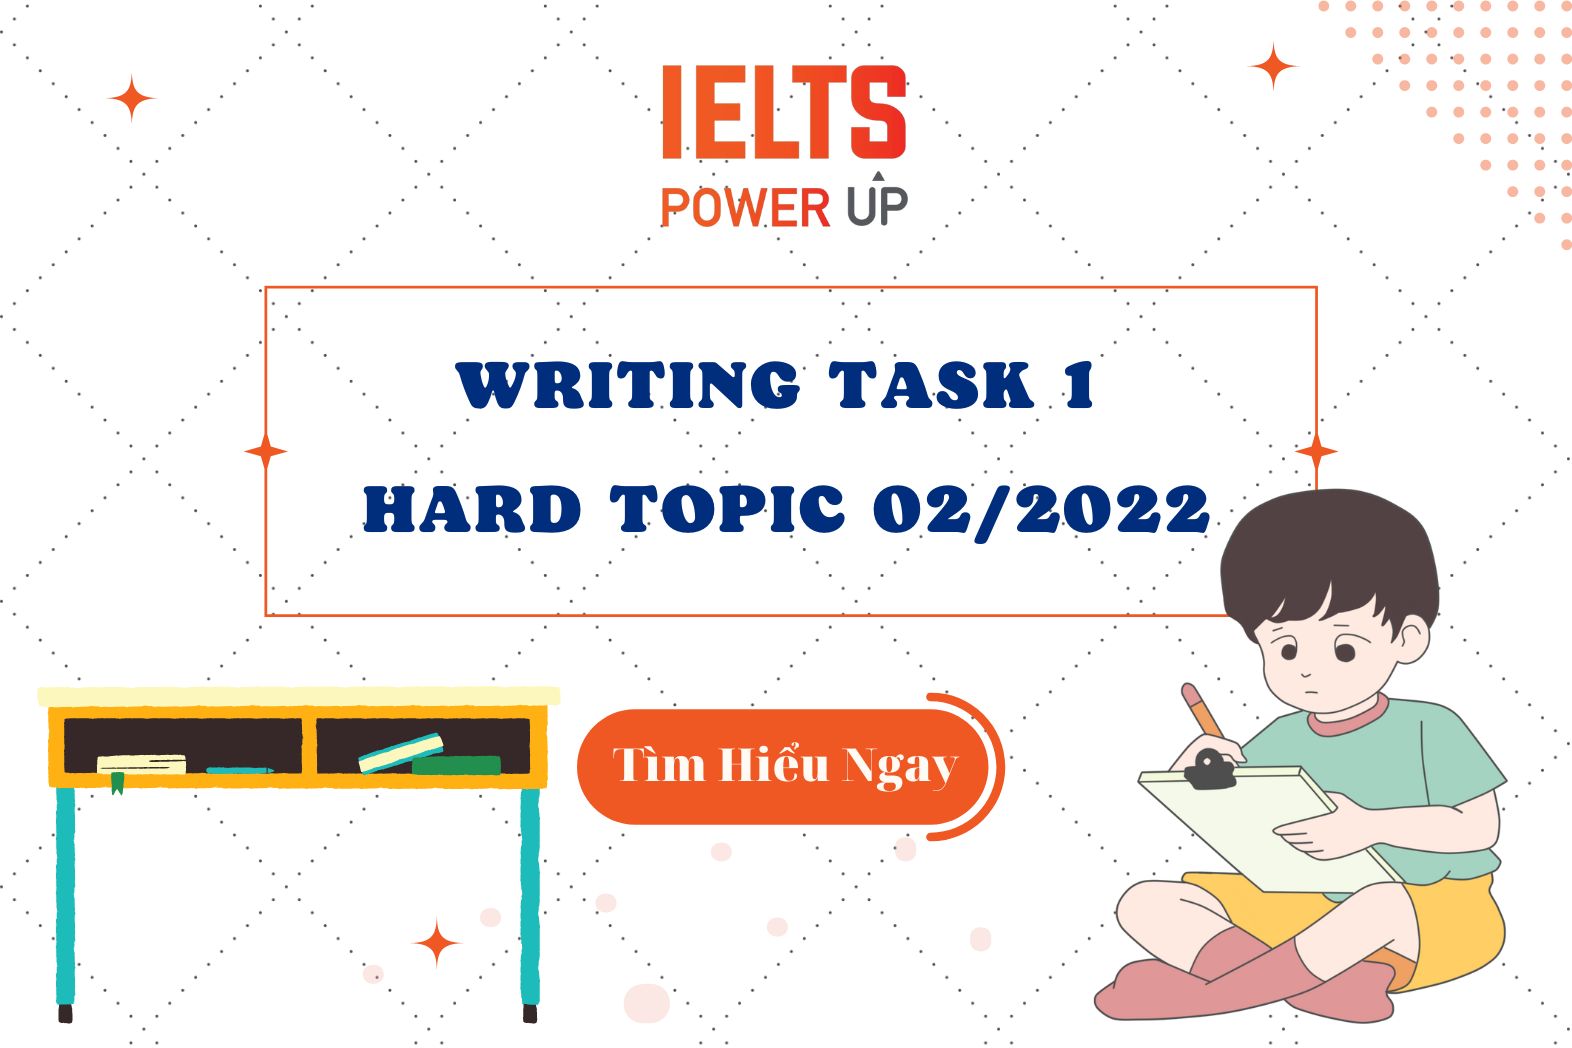 WRITING TASK 1 – HARD TOPIC 02/2022 – FLOODS AND SOLUTIONS